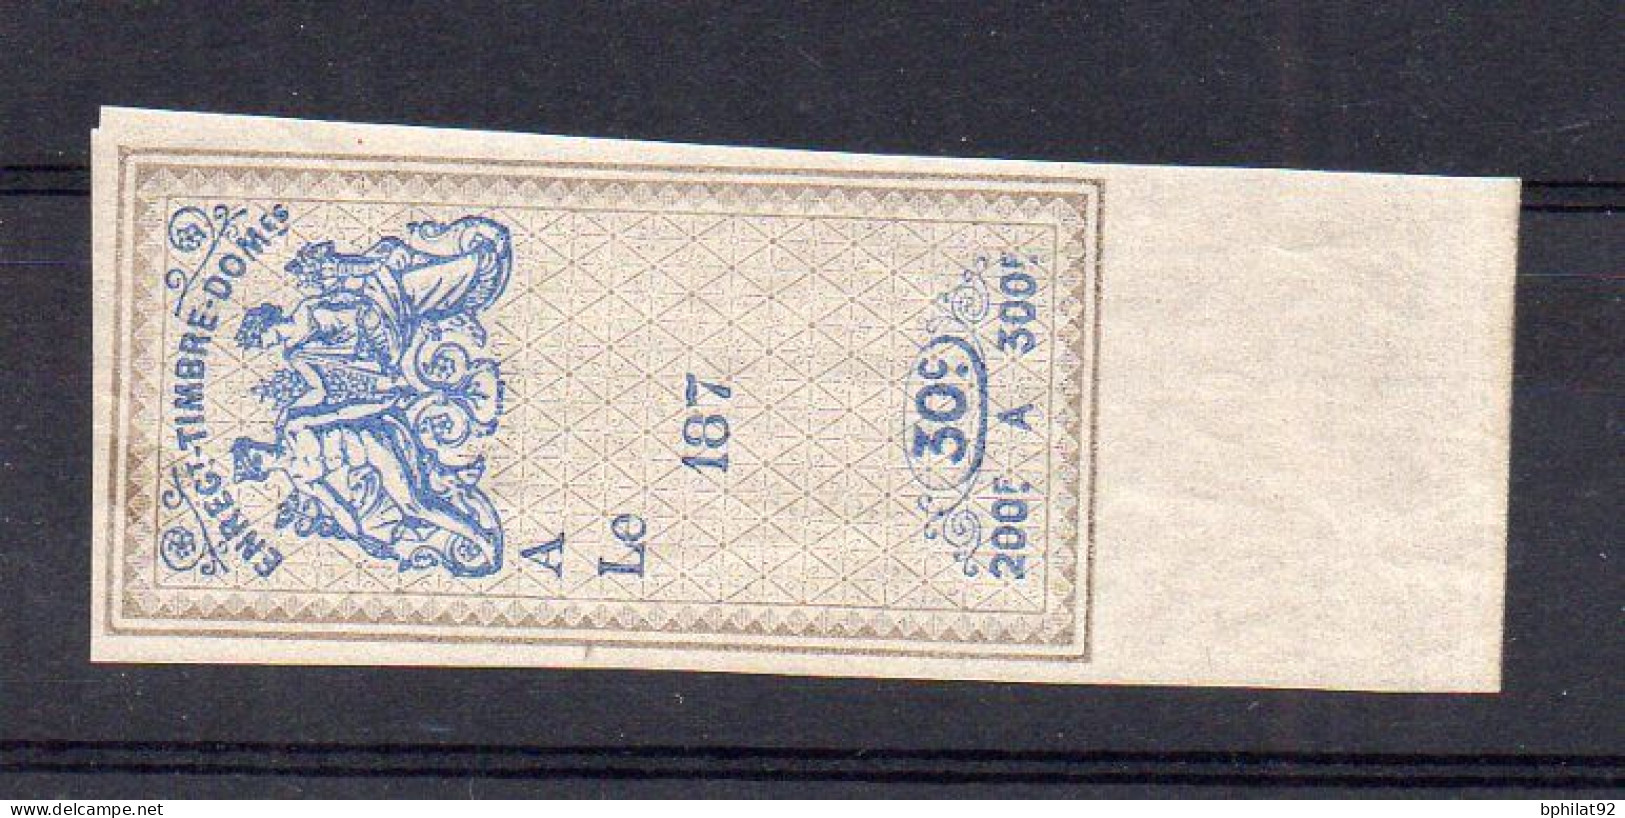 !!! FISCAL,  ENREGISTREMENT DOMAINES N°185B NEUF * - Stamps